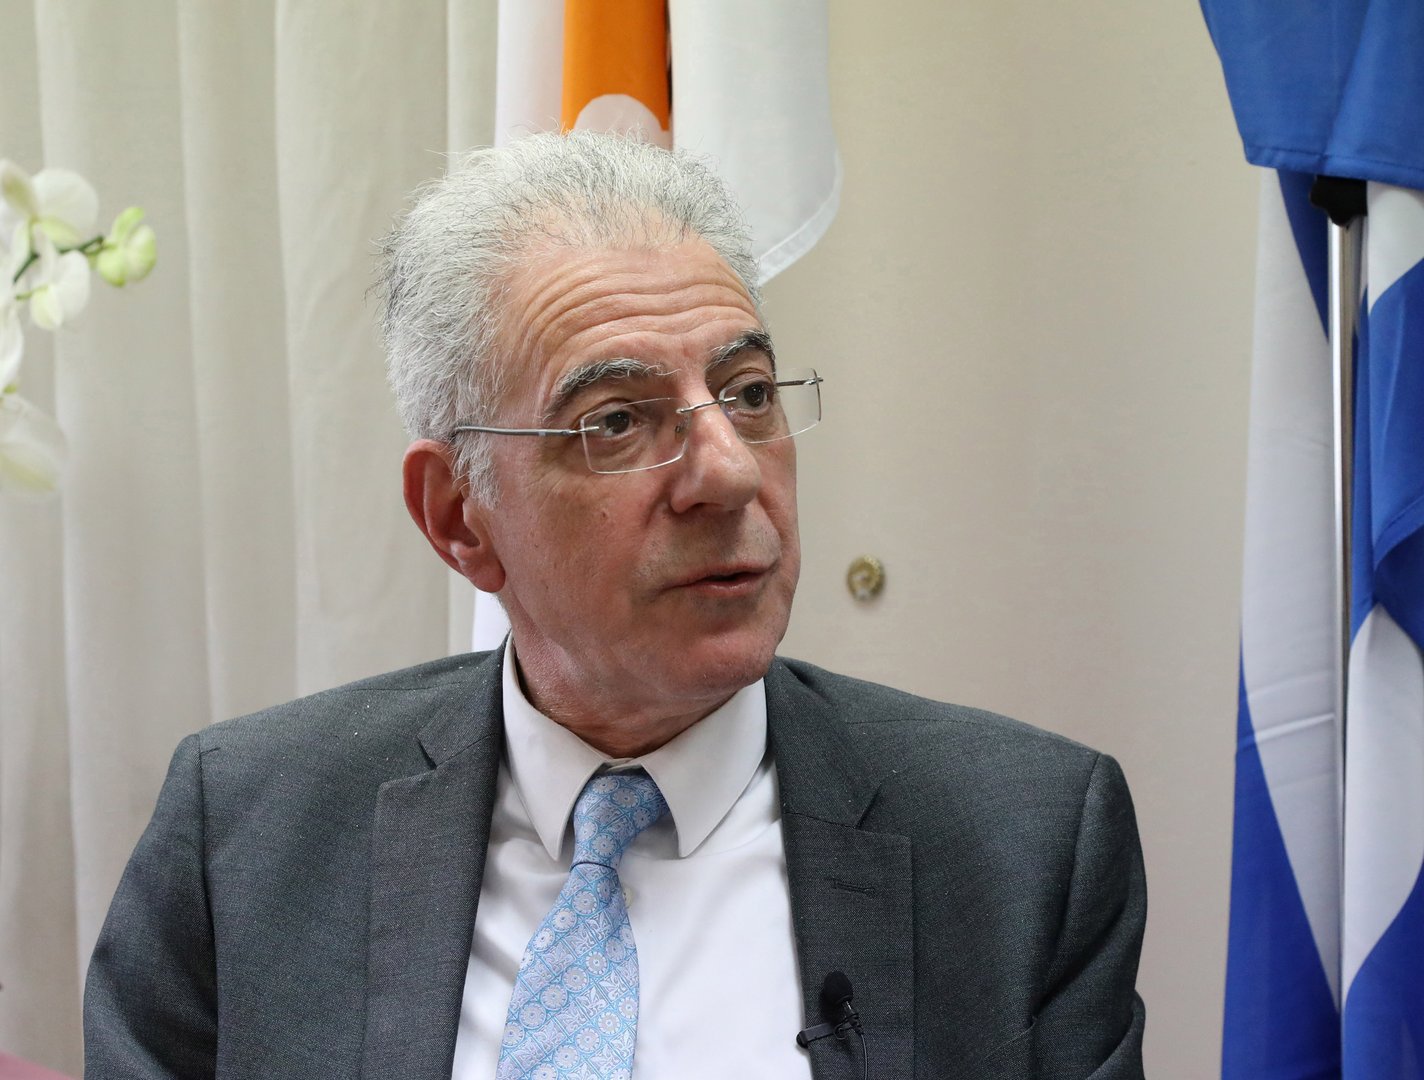 image ‘No censorship in Cyprus’ minister says amid book furore